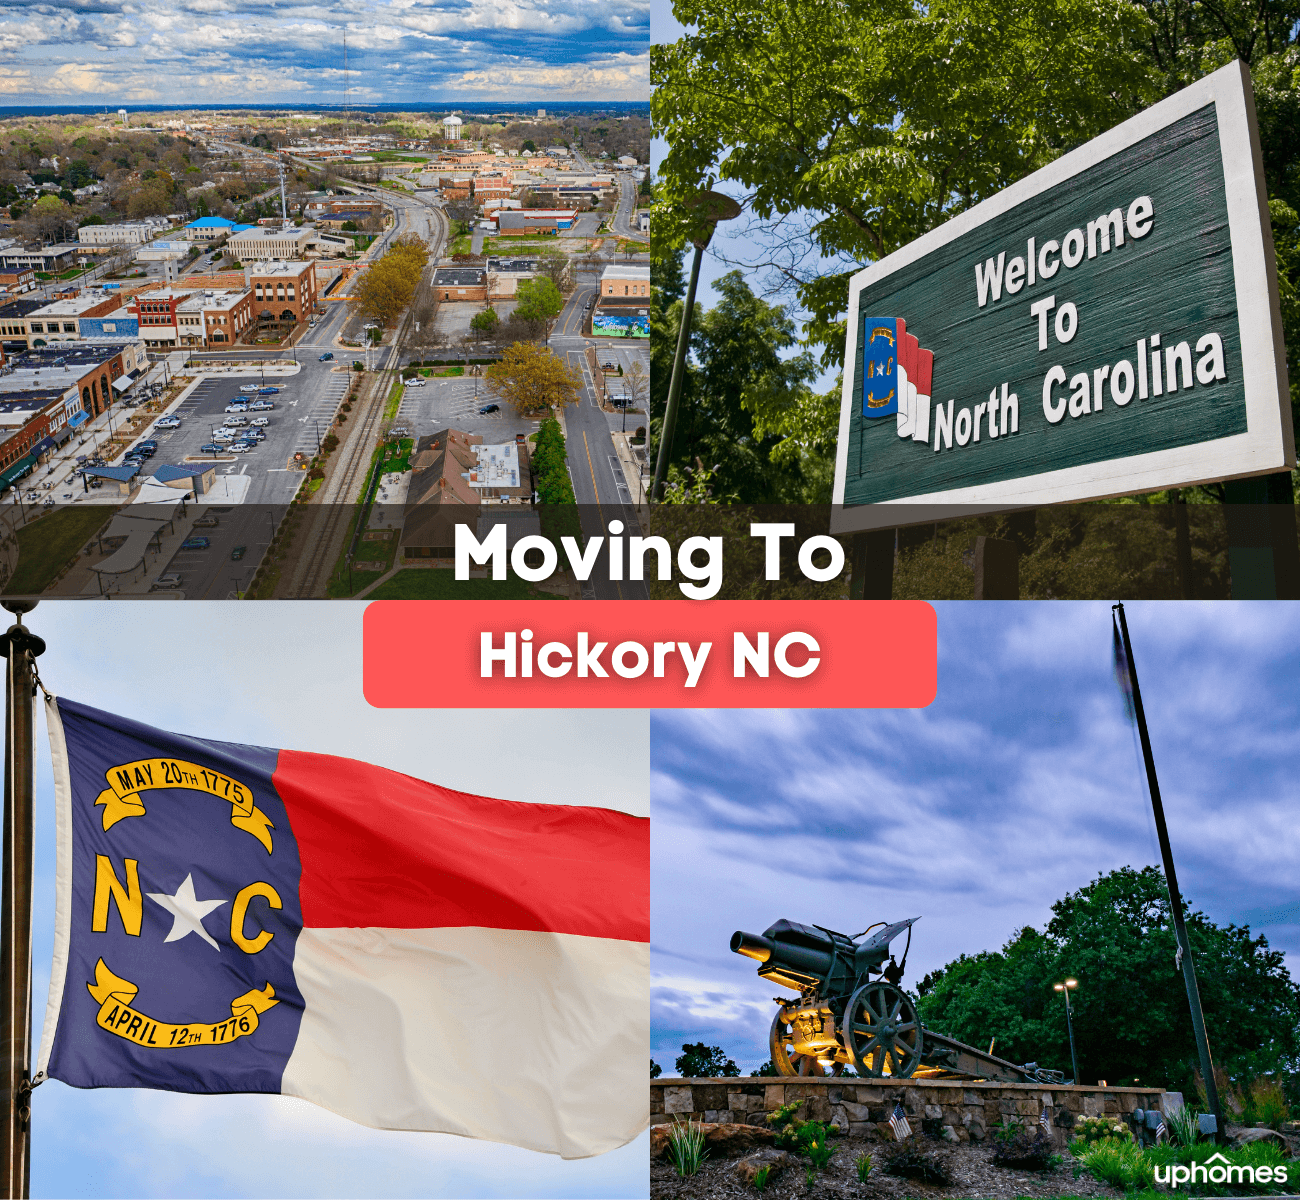 Moving to Hickory NC - What is life like living in the town of Hickory, NC? The pros and cons!